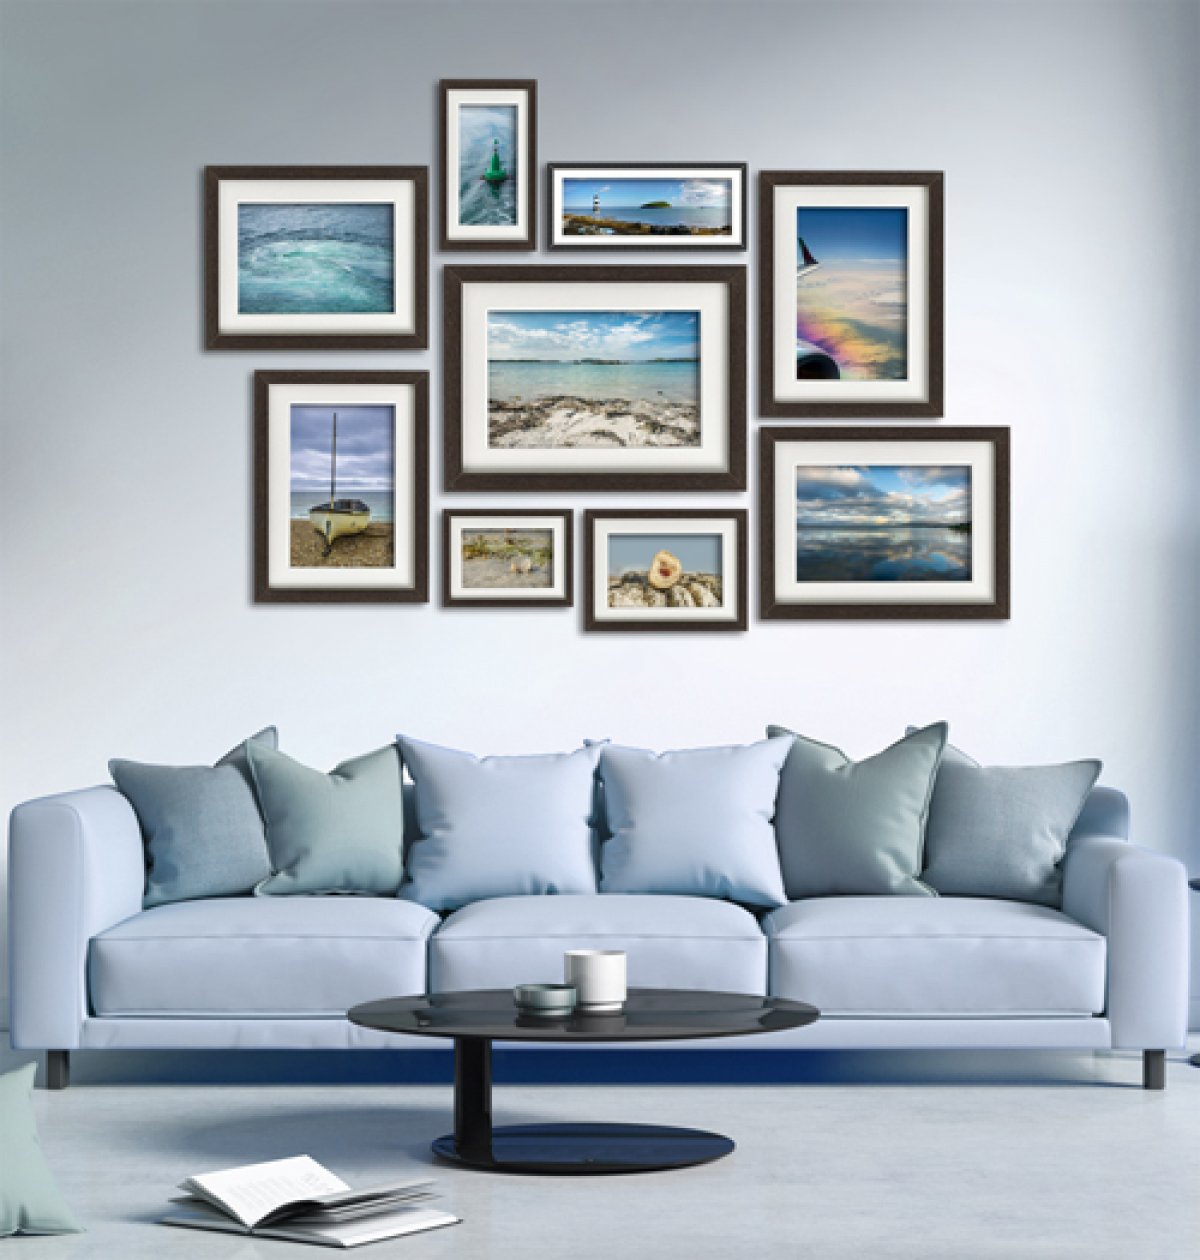 Example salon-style picture hanging layout